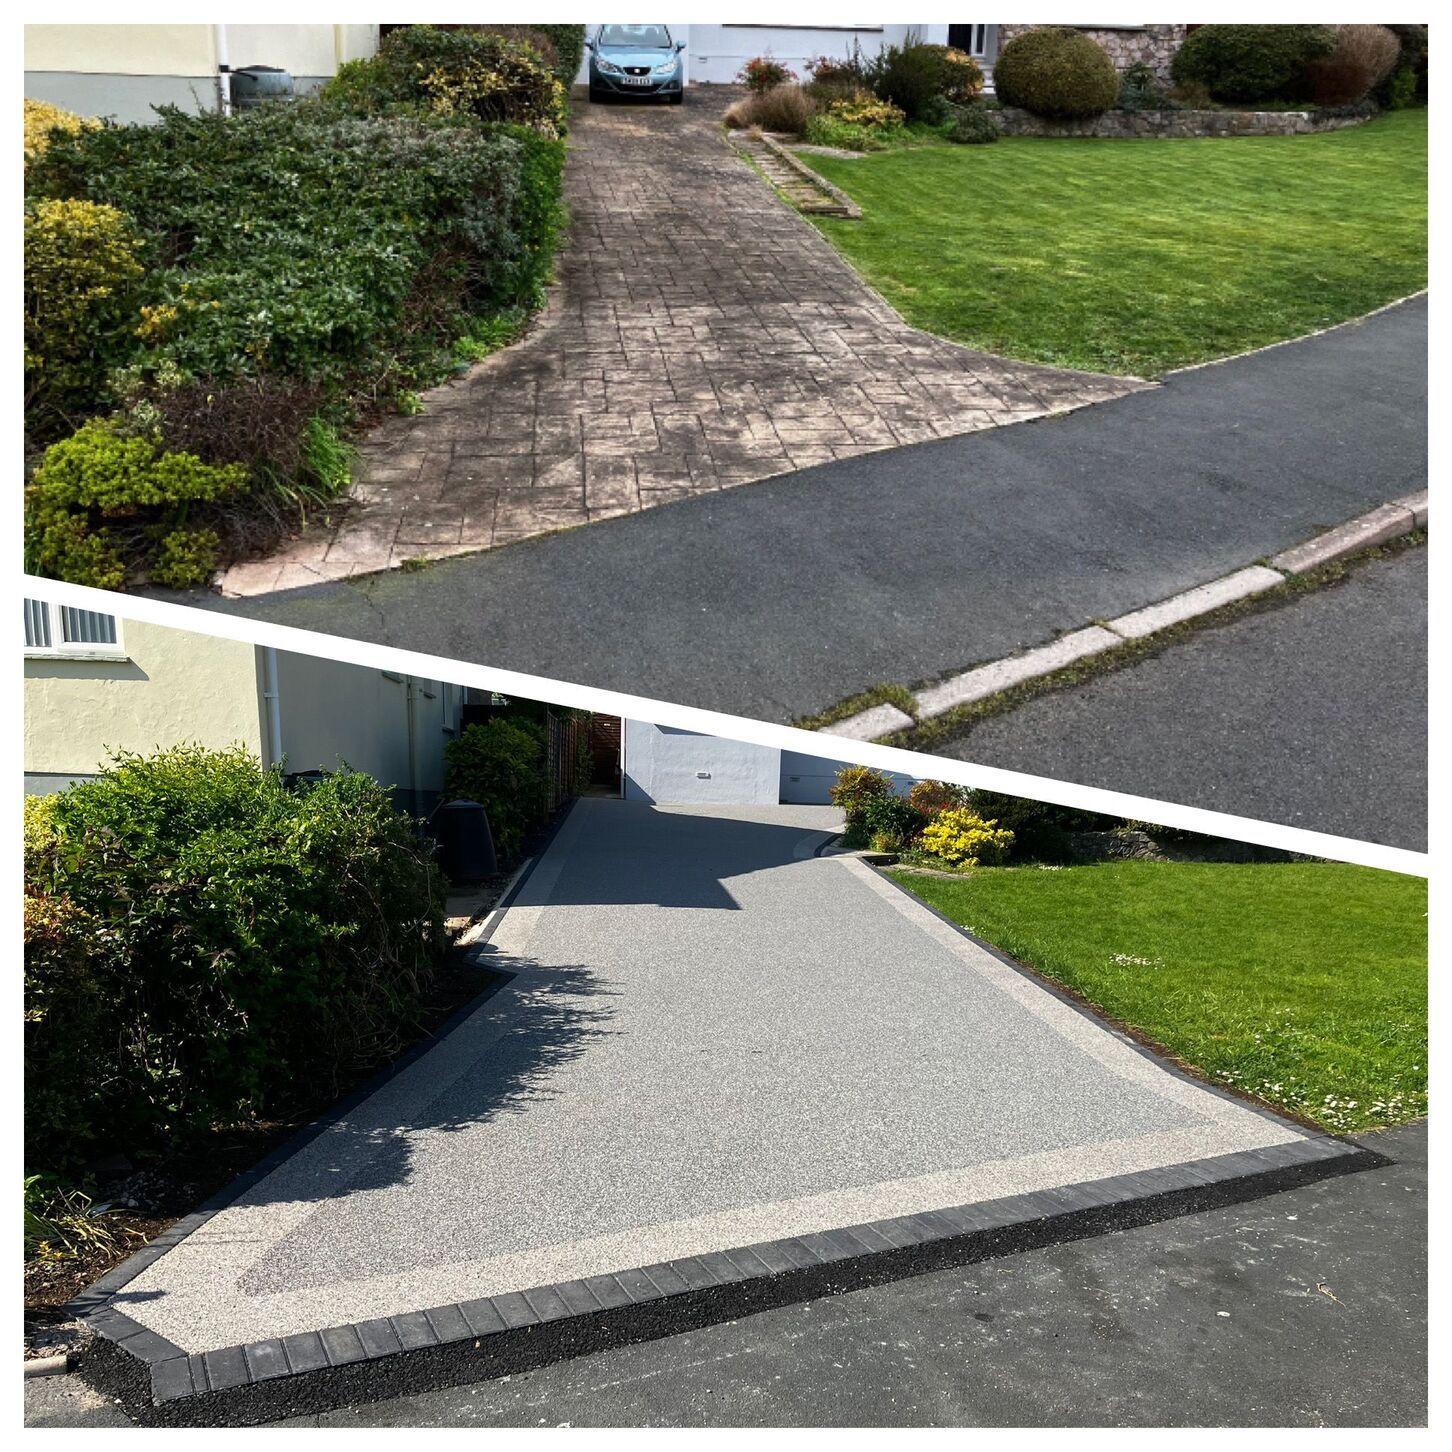 Before and after resin driveway transformation, for a property between Torquay and Paignton.